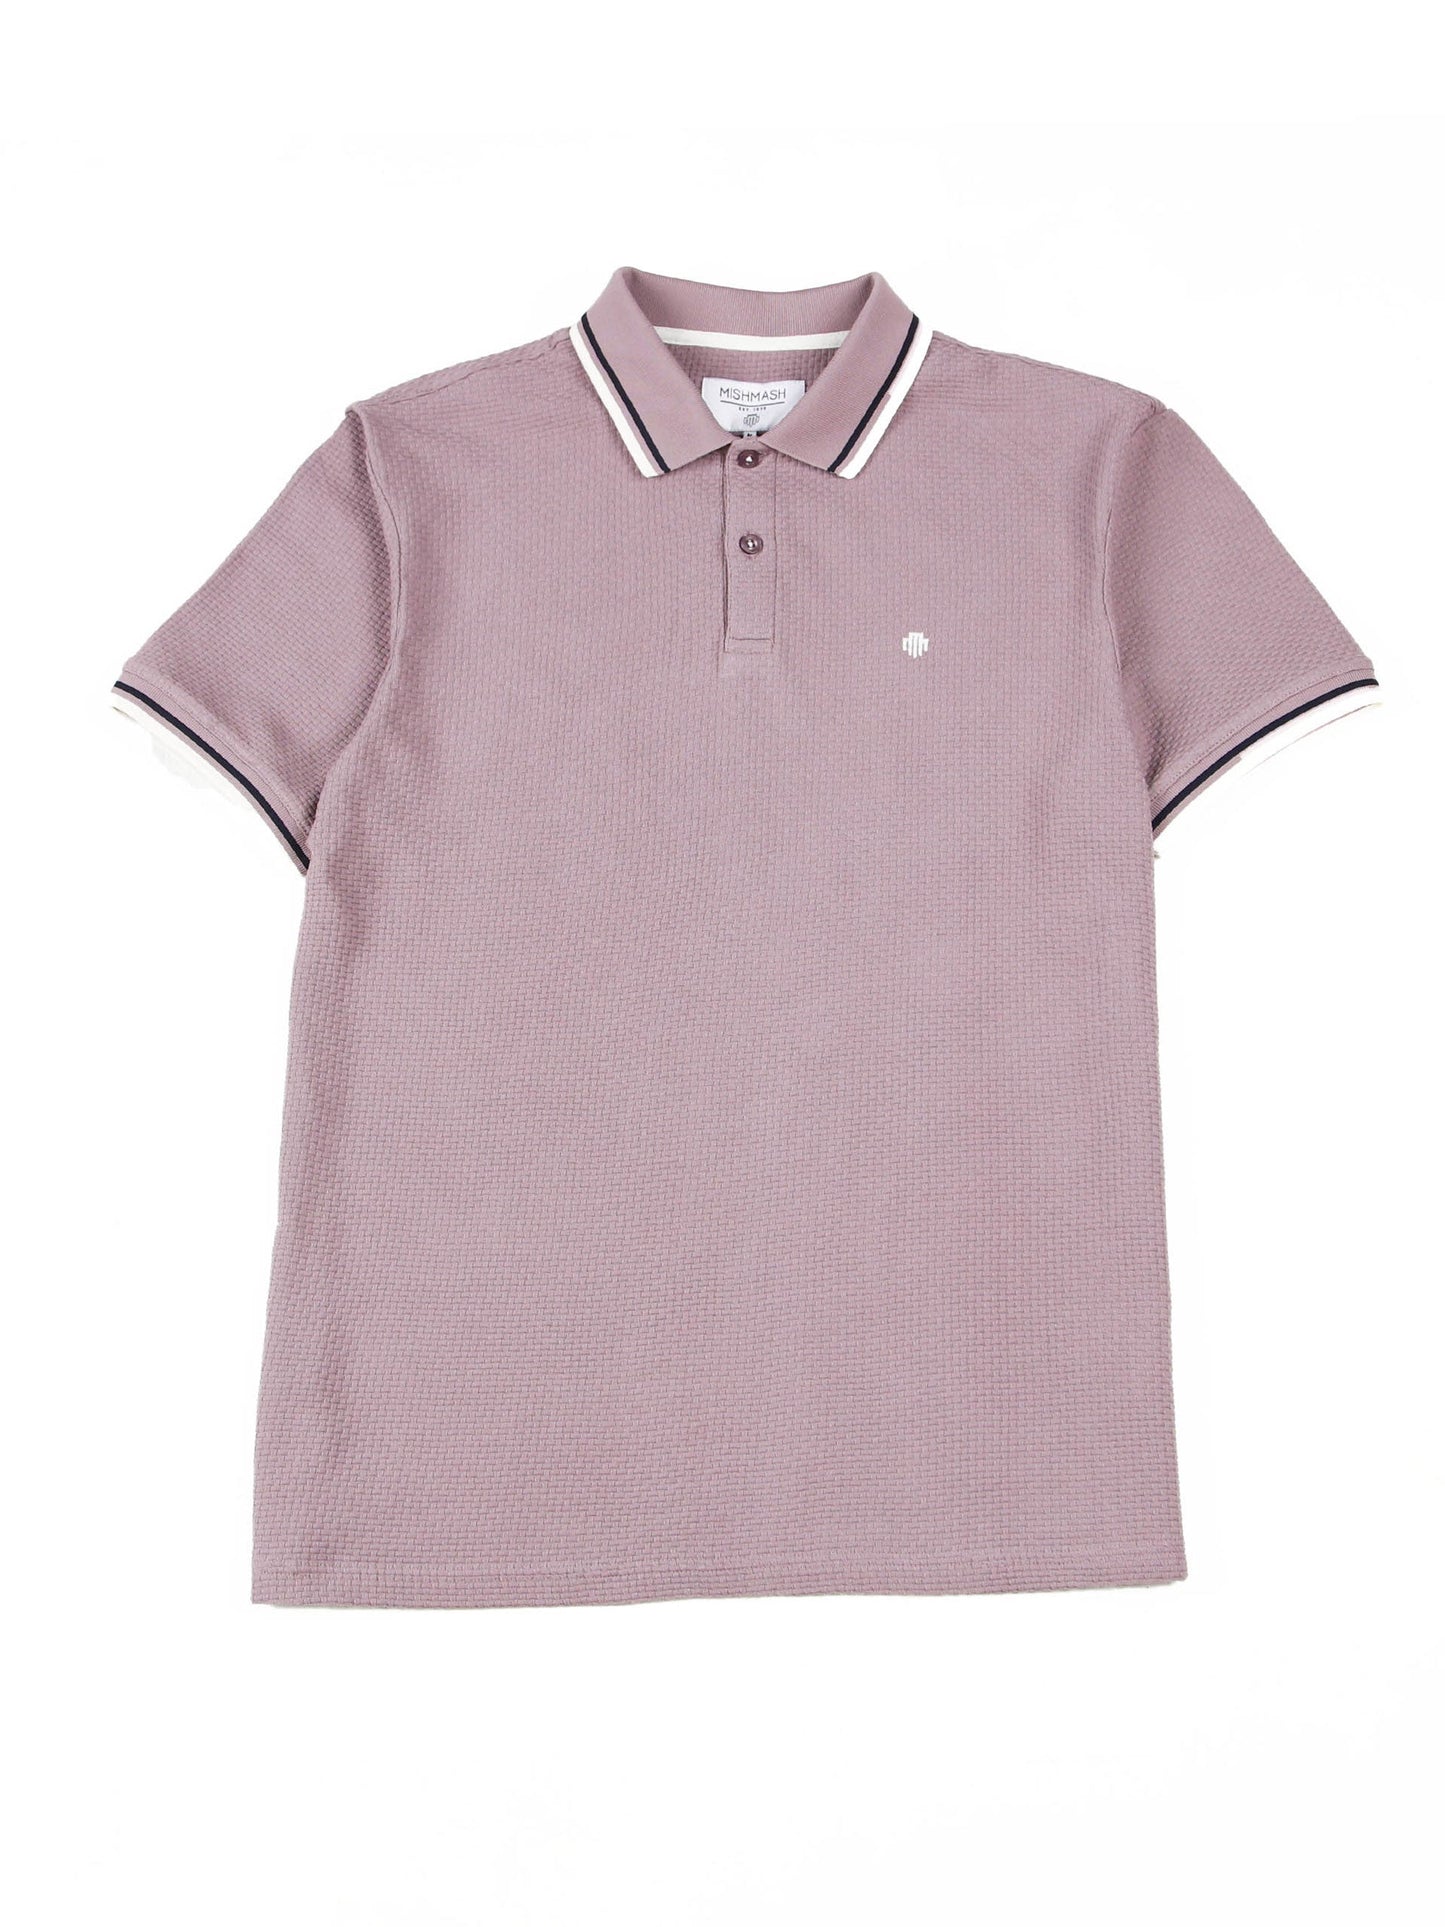 Regular Fit Textured Cotton Jersey Stockholm Dusky Pink Polo